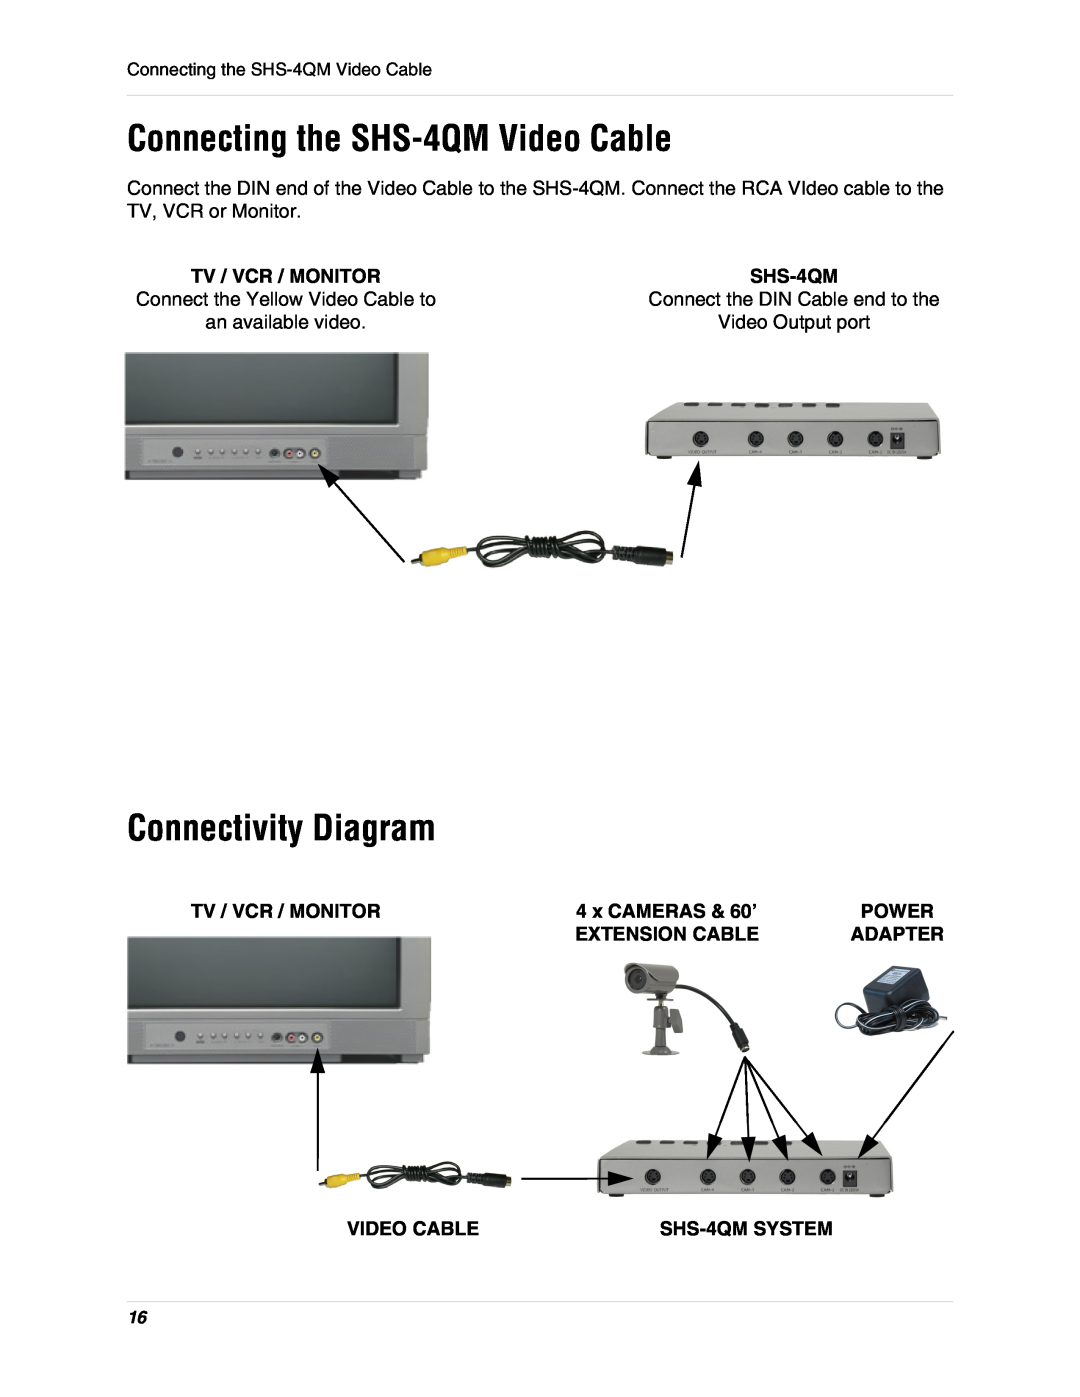 LOREX Technology Connecting the SHS-4QM Video Cable, Connectivity Diagram, Tv / Vcr / Monitor, x CAMERAS & 60’, Power 